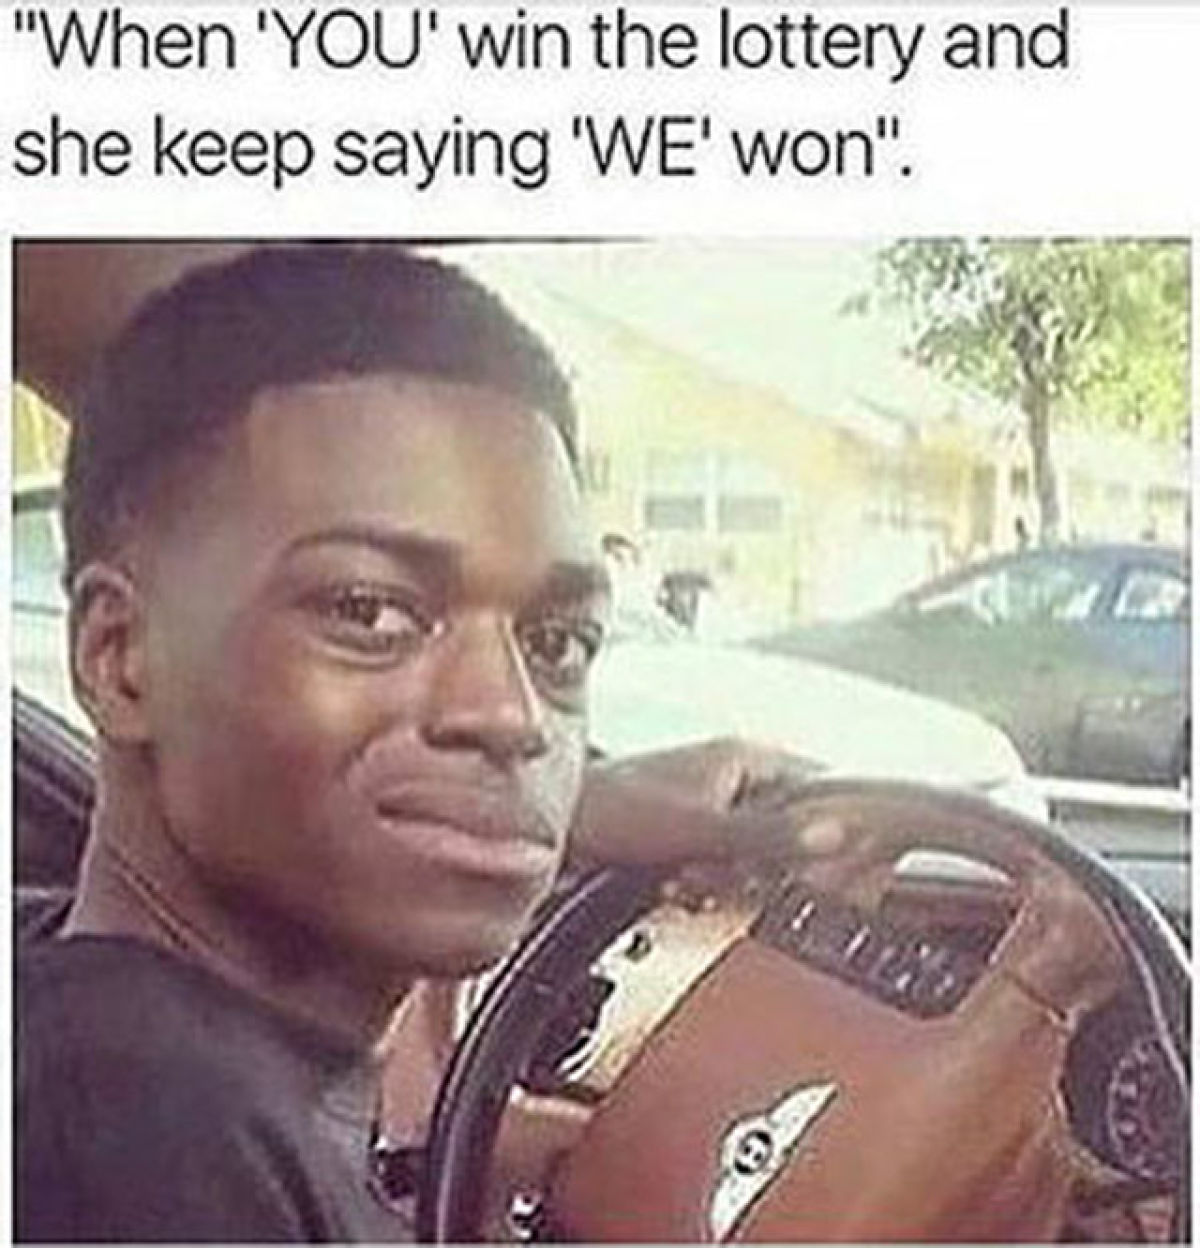 you win the lottery meme - "When 'You' win the lottery and she keep saying 'We'won".